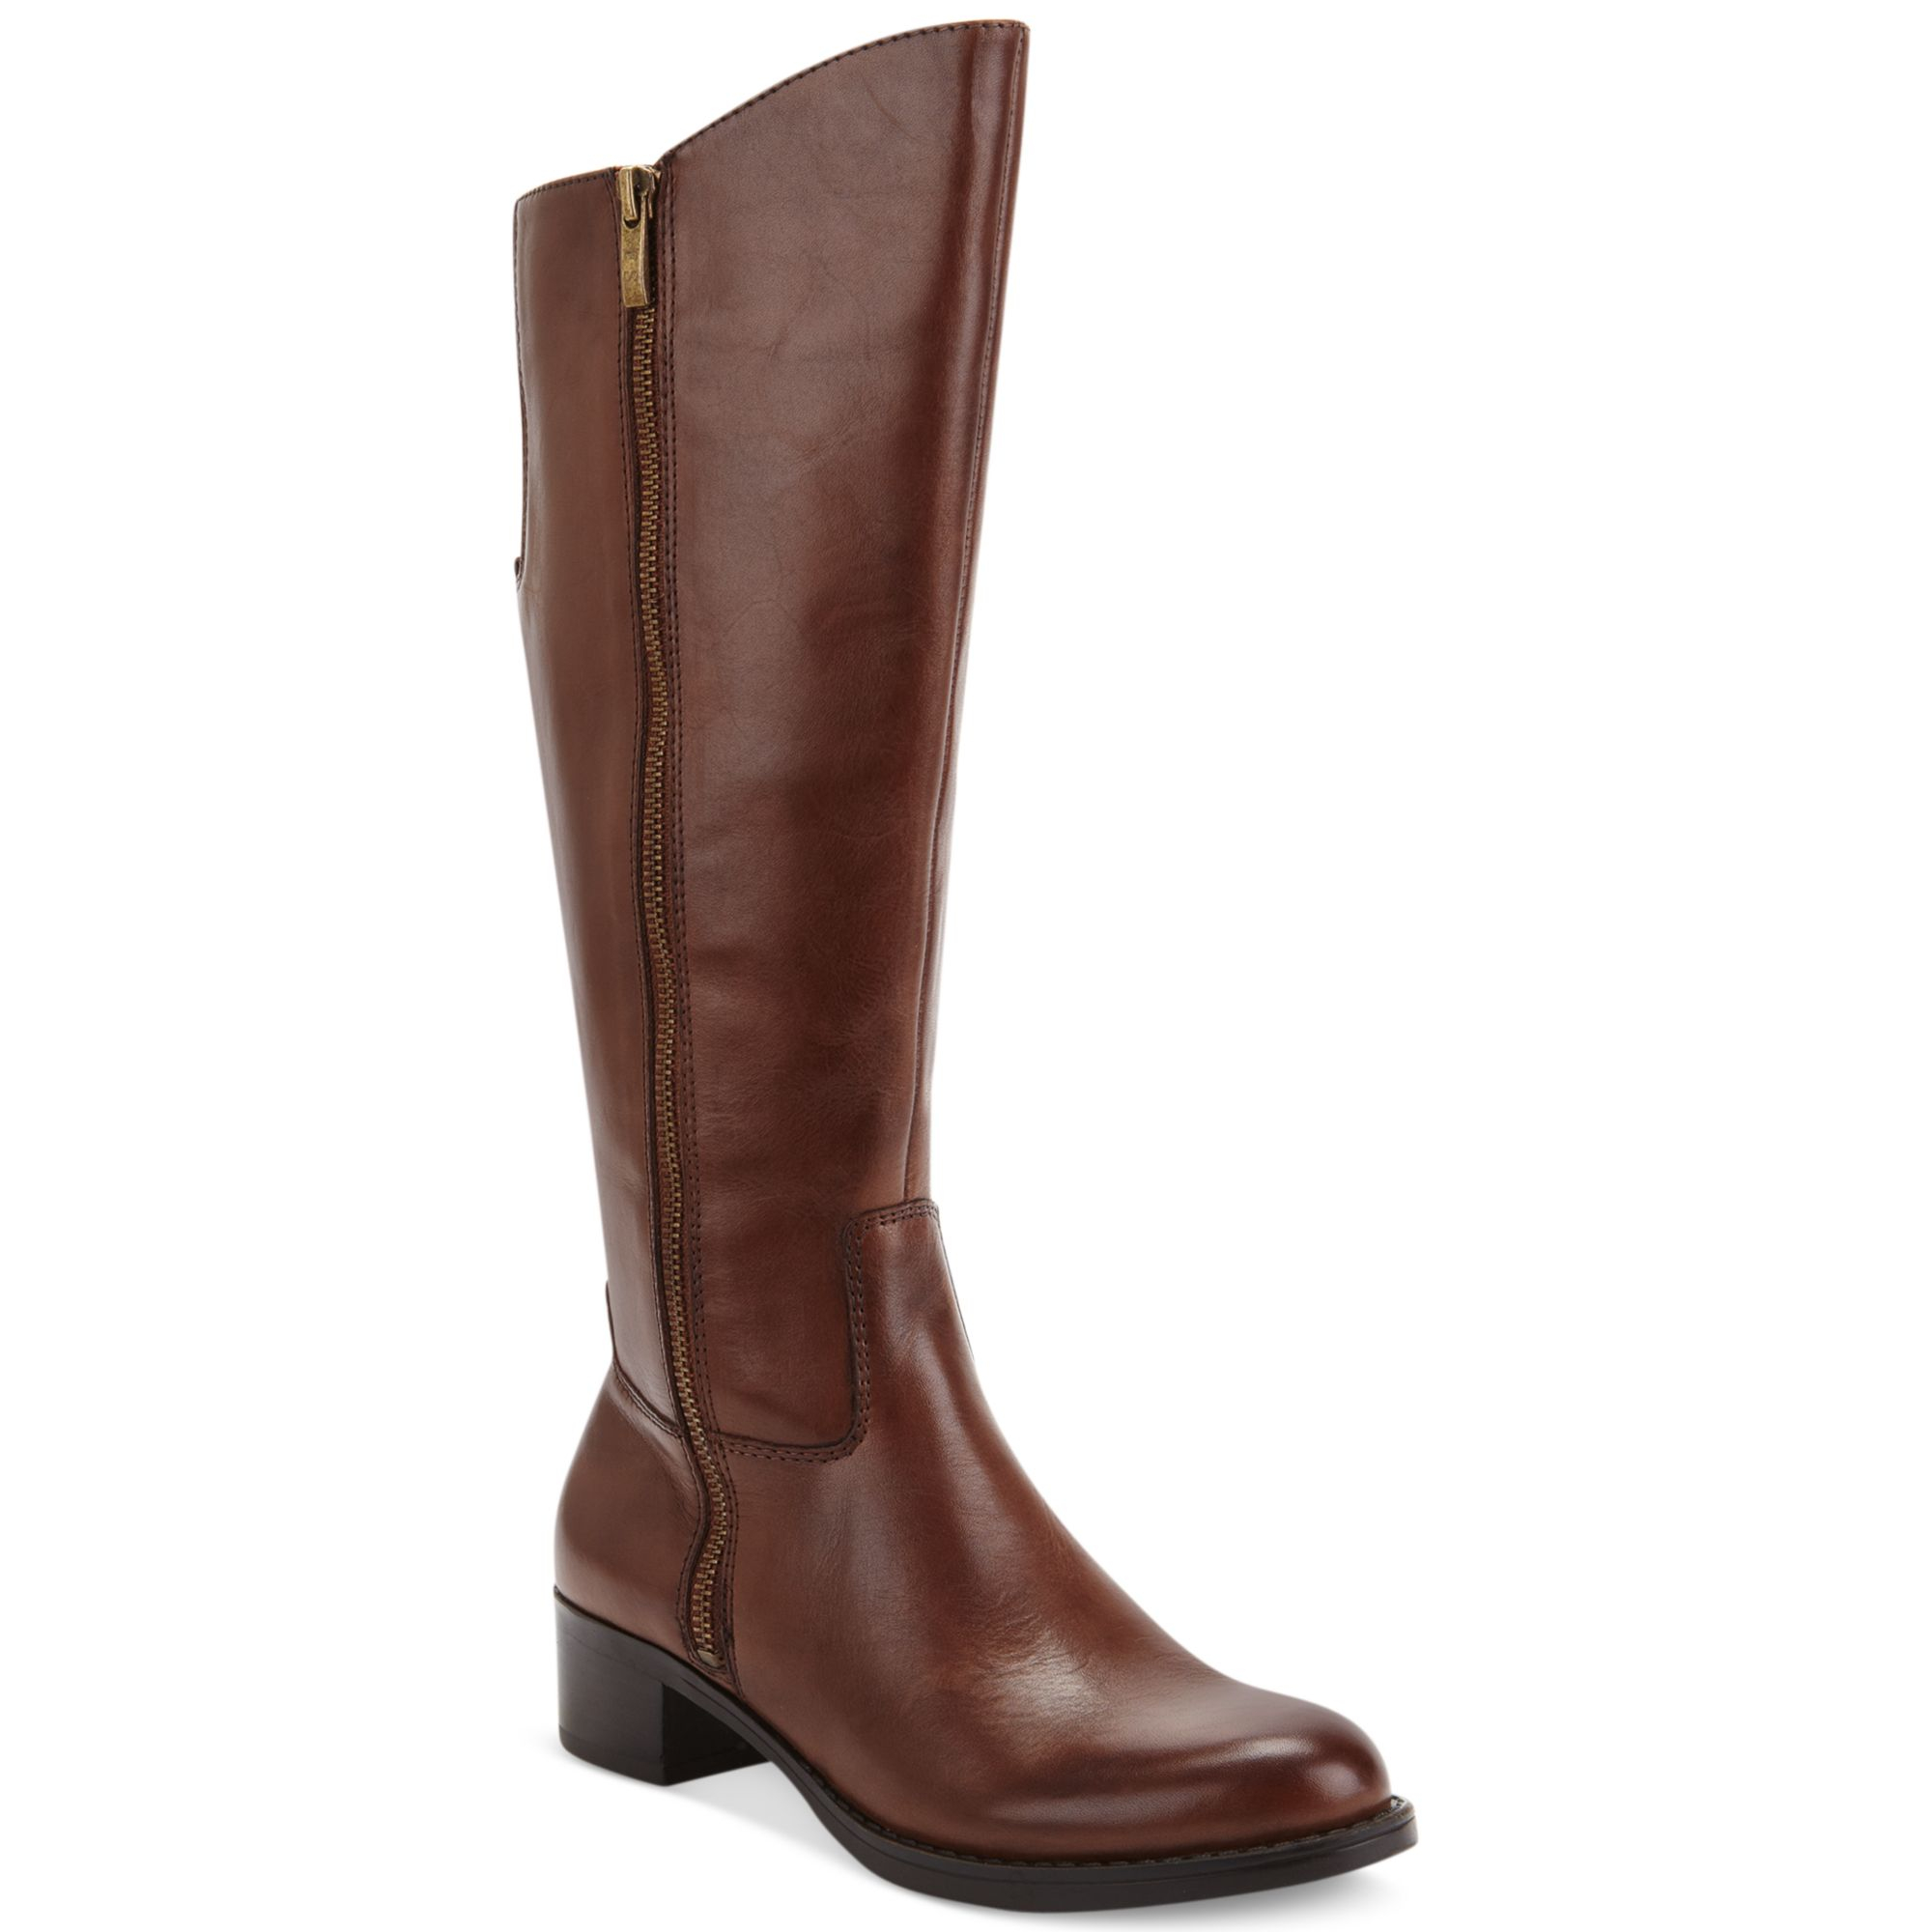 Franco sarto Christina Tall Riding Boots in Brown | Lyst